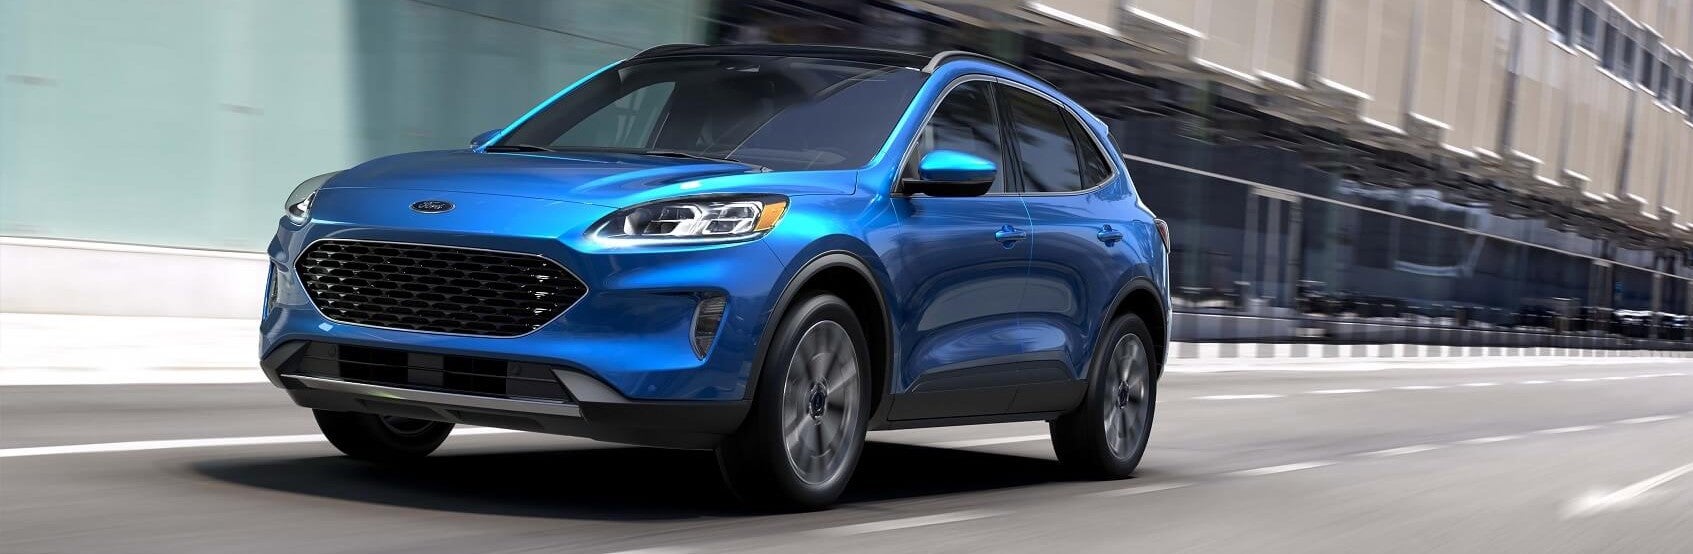 2021 Ford Escape Reviews Waldorf MD